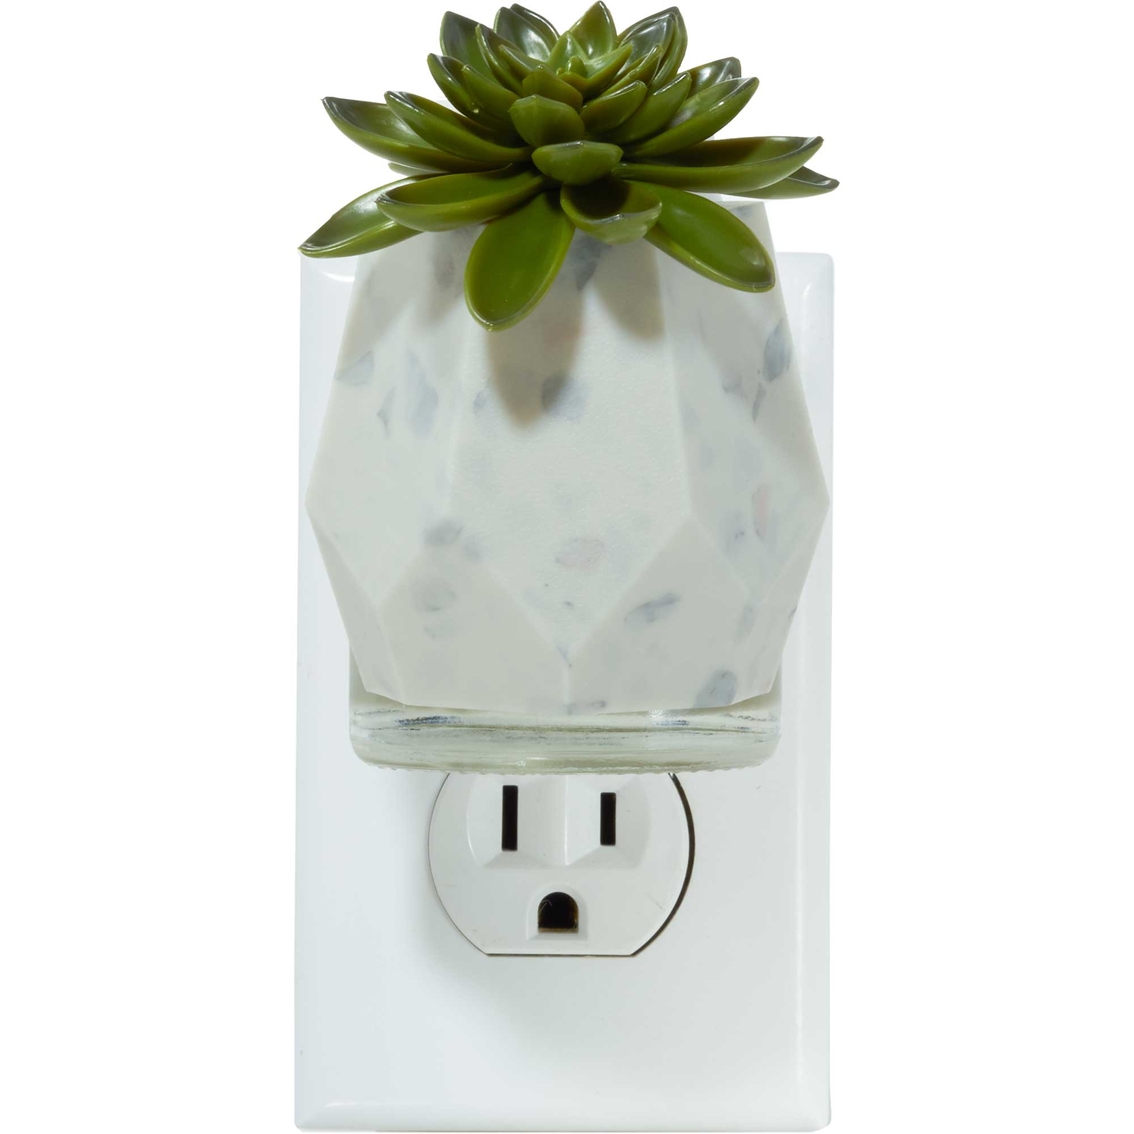 Yankee Candle Succulent ScentPlug Diffuser - Image 2 of 3